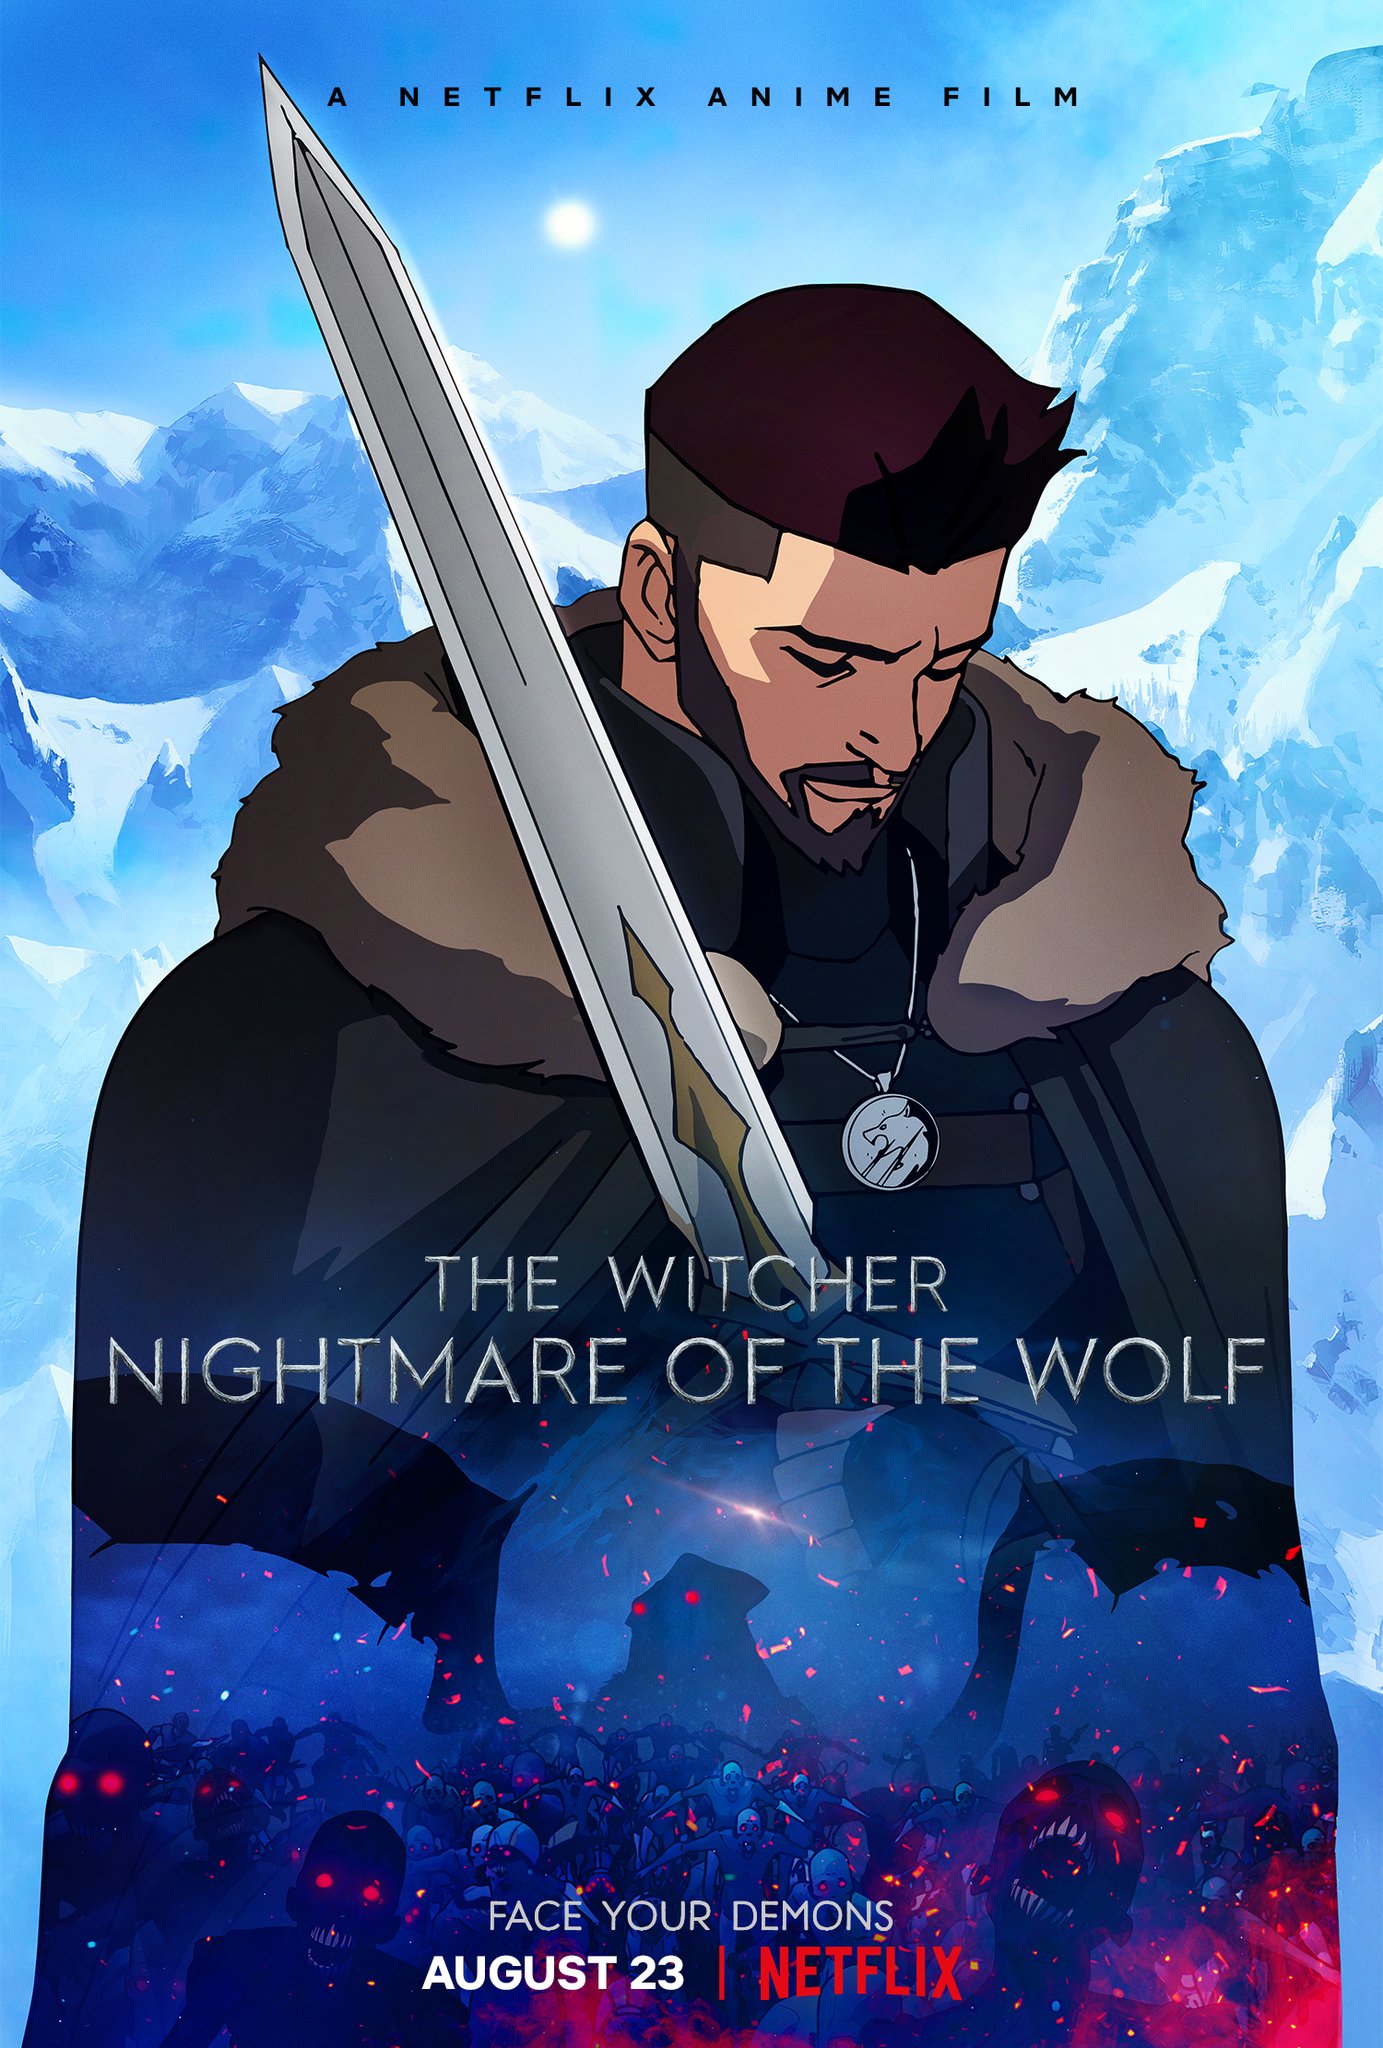 What do you know about The Witcher: Nightmare of the Wolf, anime coming on  Netflix? - Quora